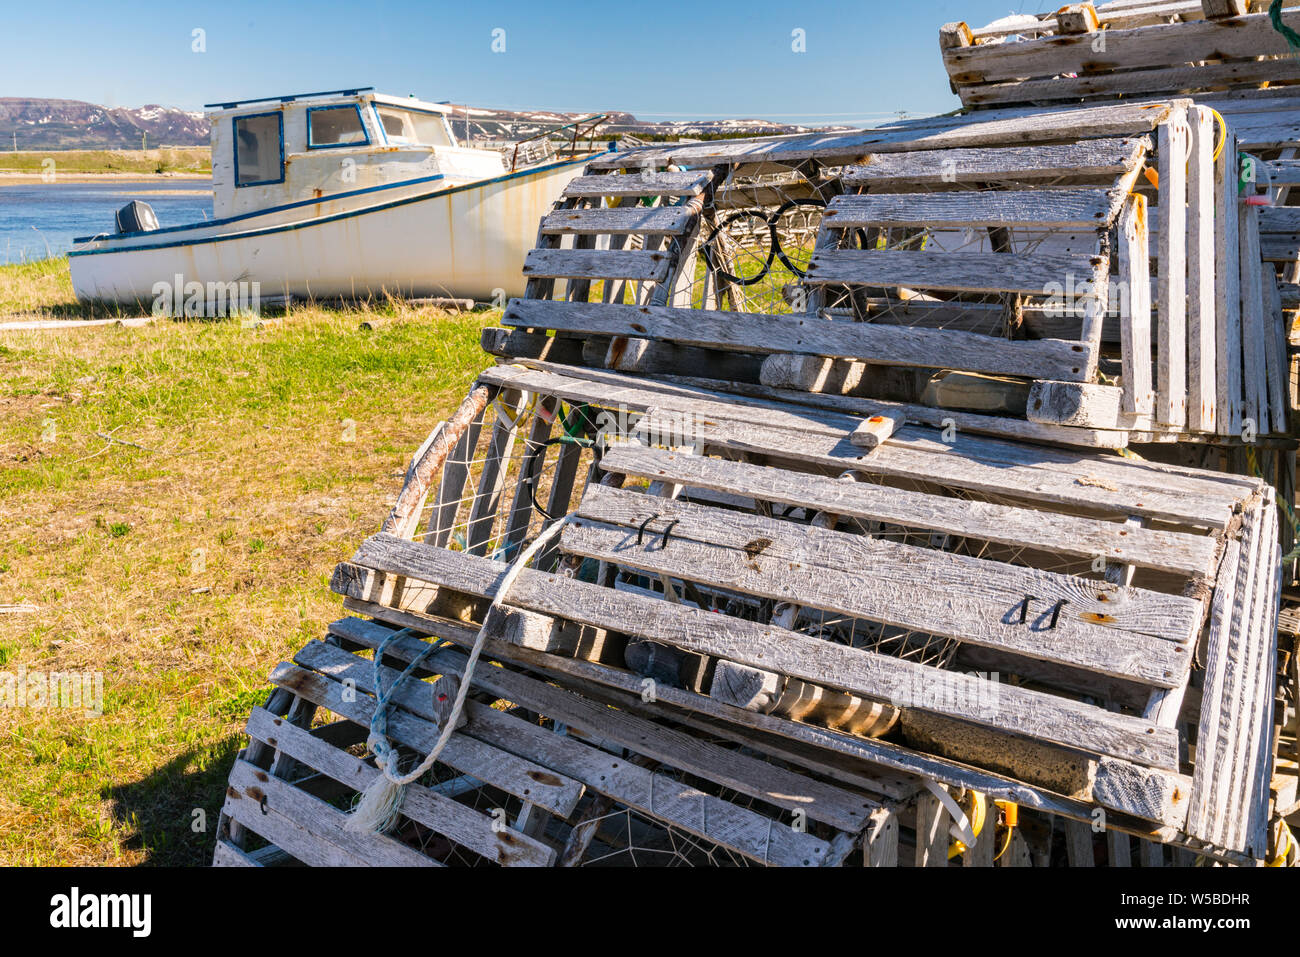 Old wooden lobster traps and fishing boats in Newfoundland, Canada Stock Photo